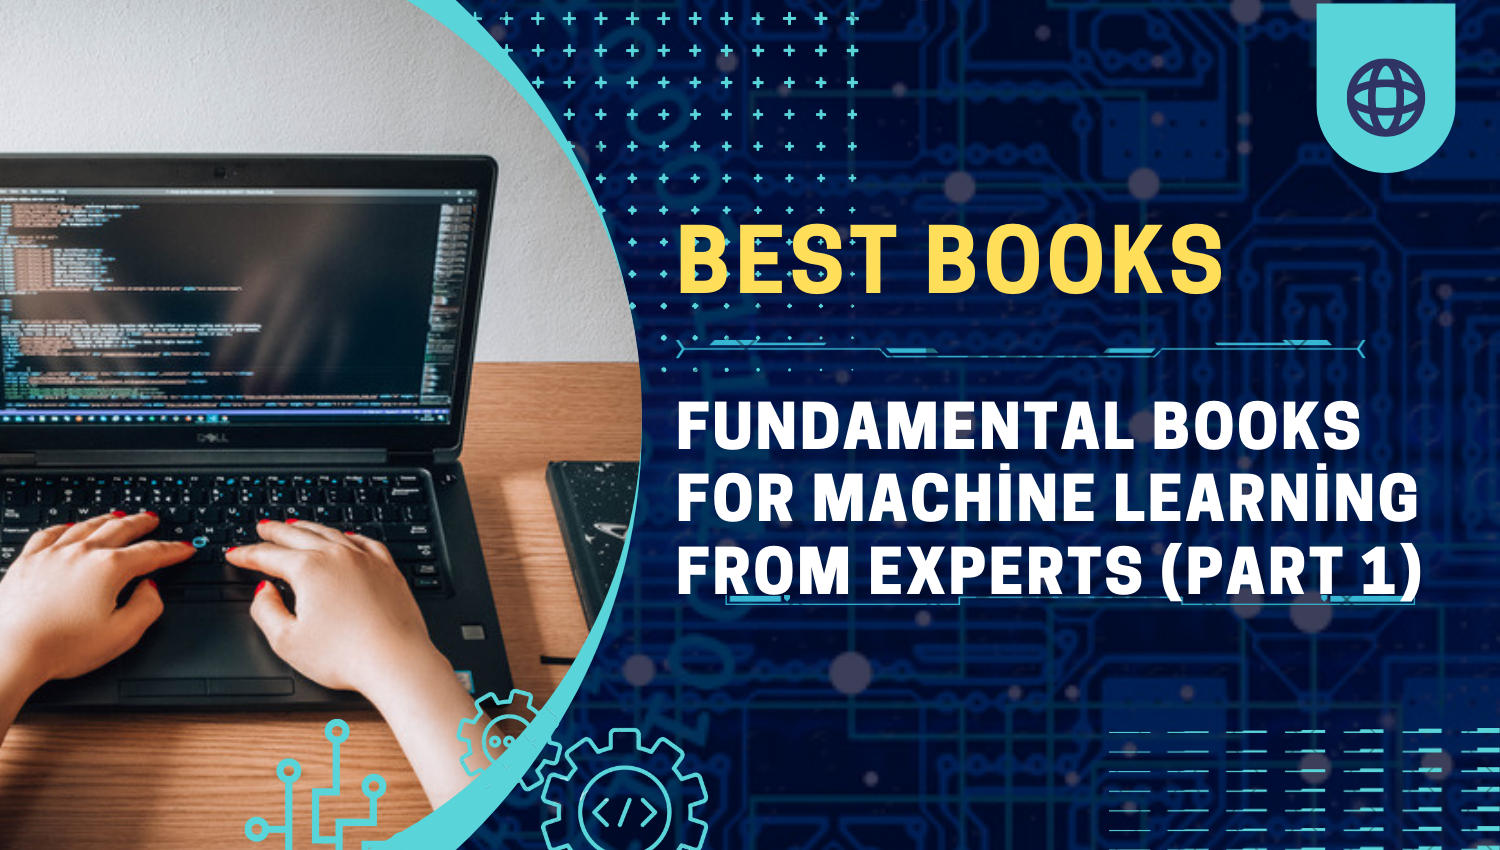 Artificial Intelligence Books Expert Recommendations for Machine Learning Books Essential Reads on Machine Learning Top Picks for AI Learning Materials Recommended Books for Learning ML